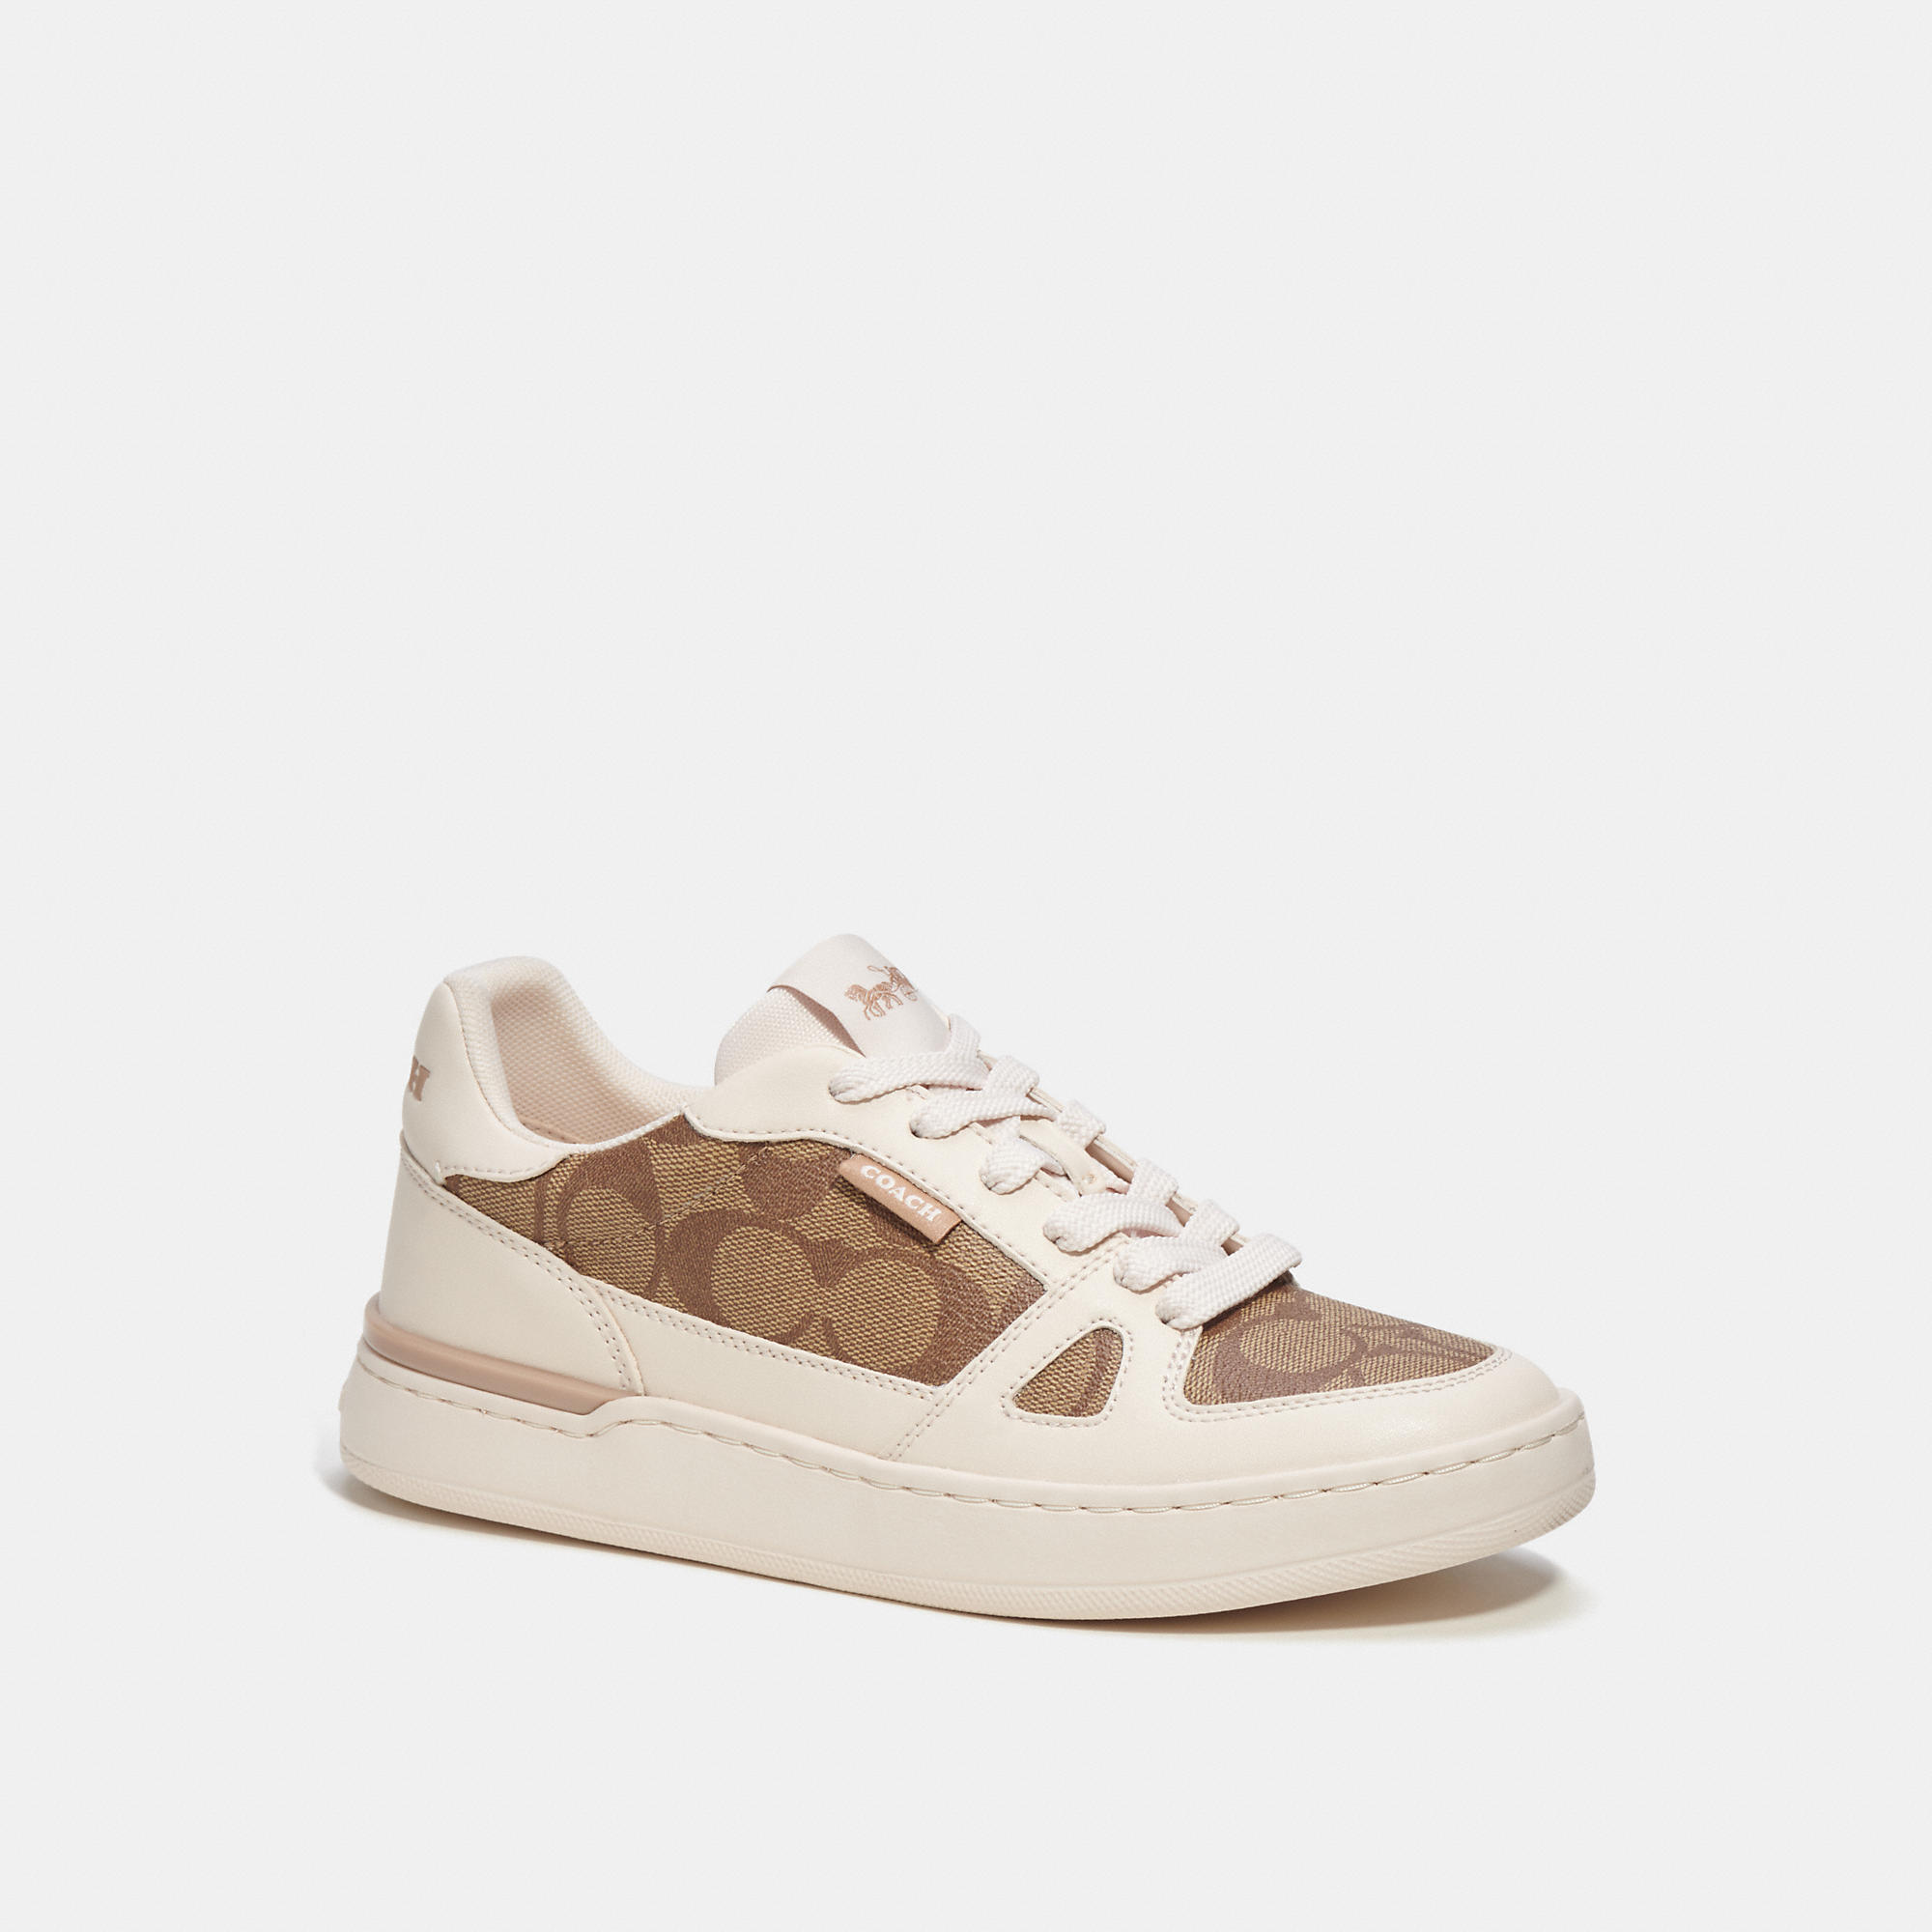 Coach Outlet Clip Court Low Top Snenaker In Signature Canvas - Multi